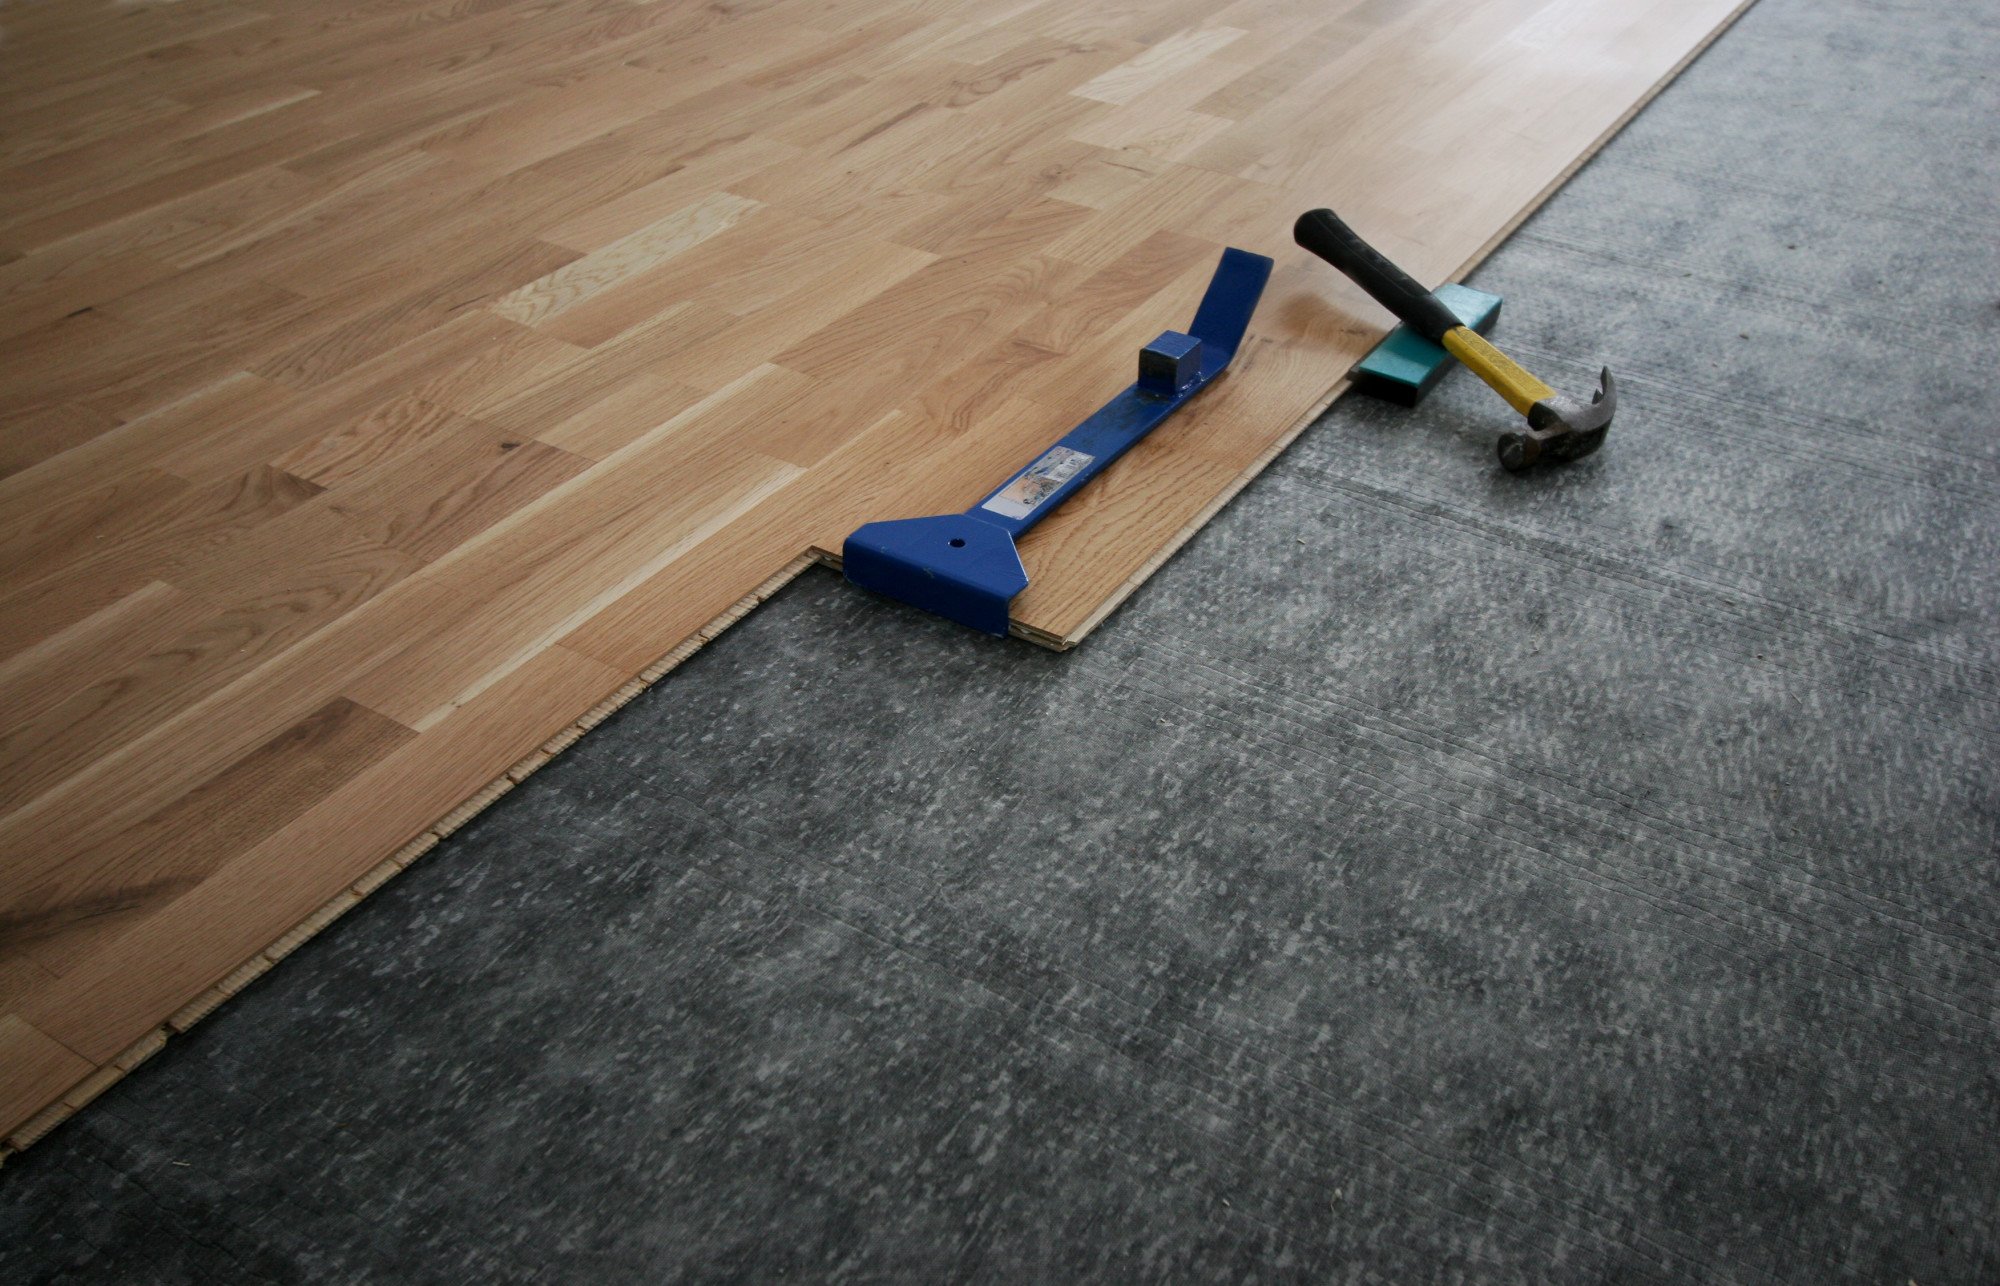 Are you wondering why your vinyl plank flooring is lifting at the edges? If so, learn about three possible causes in this guide.